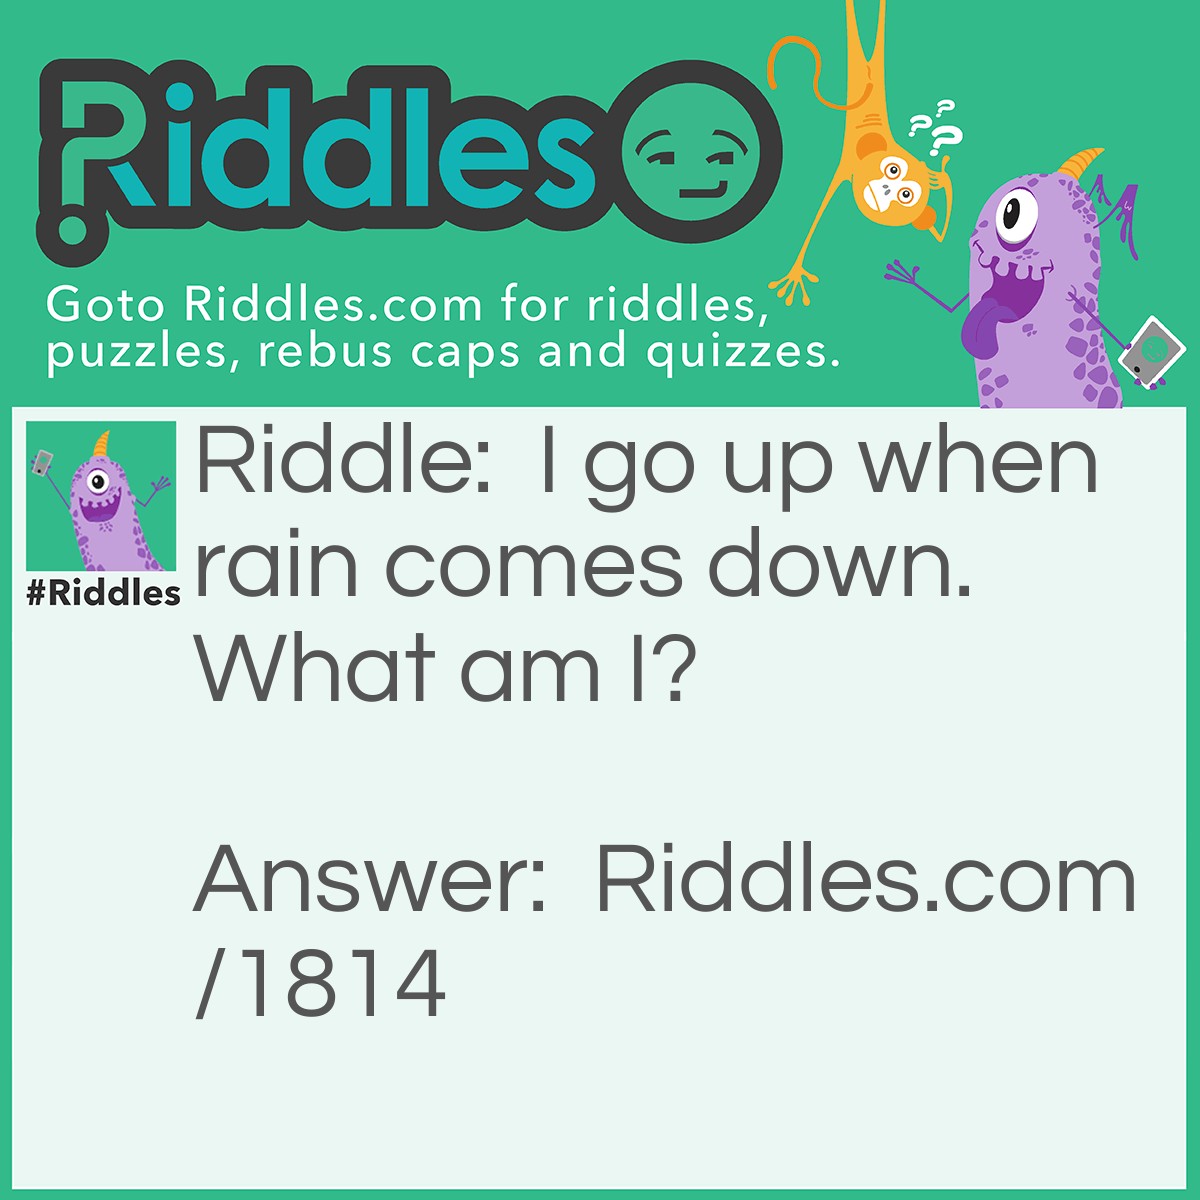 Riddle: I go up when rain comes down. What am I? Answer: An Umbrella.